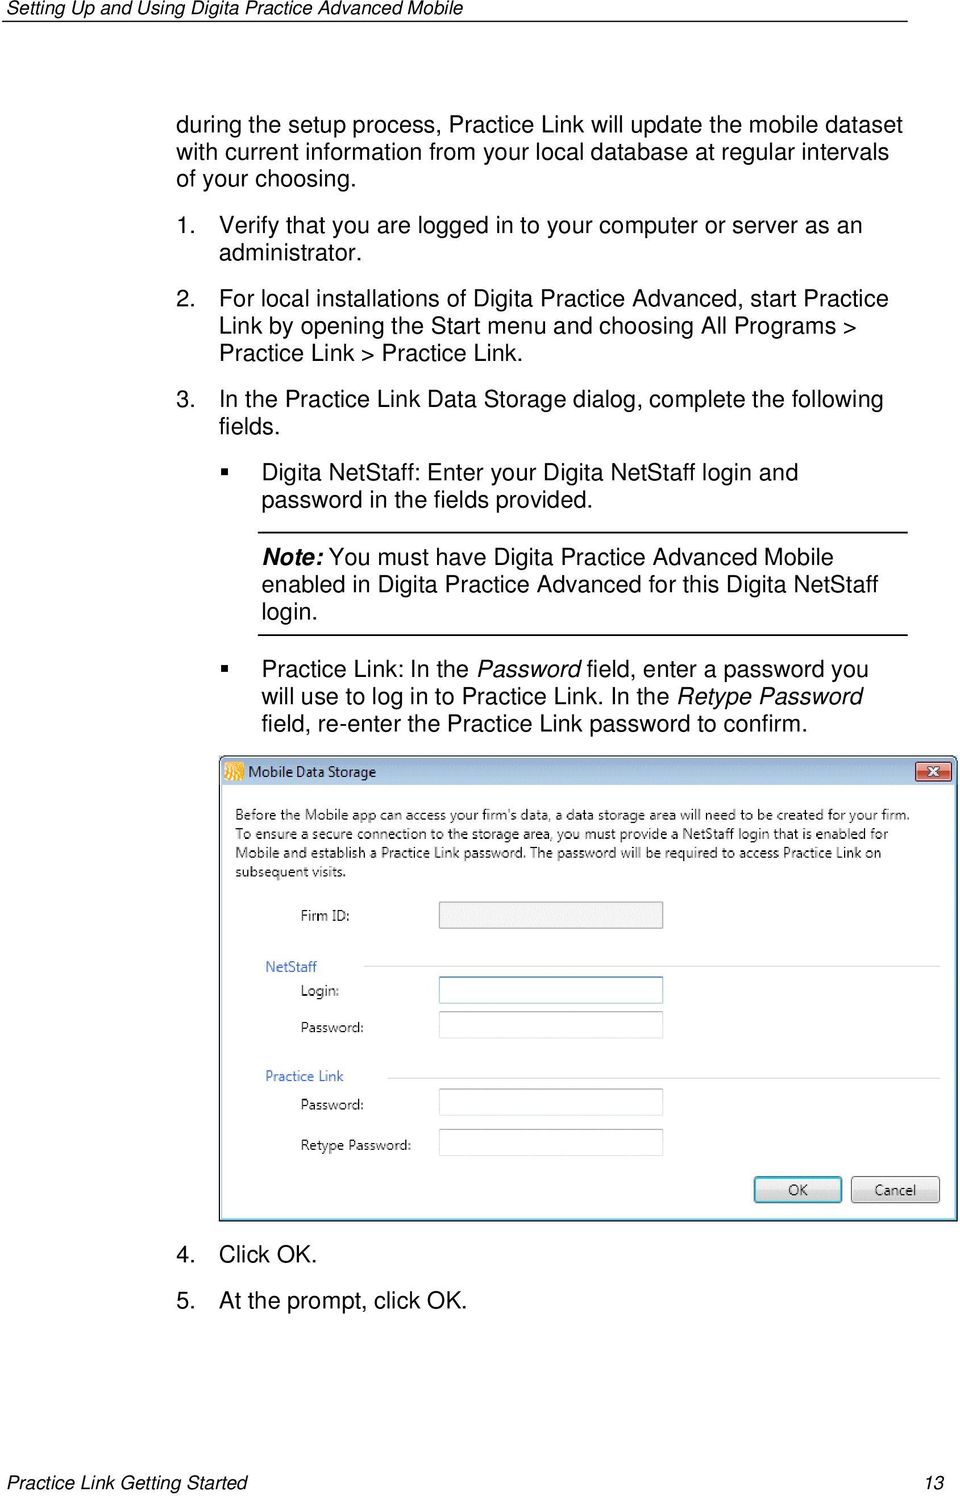 For local installations of Digita Practice Advanced, start Practice Link by opening the Start menu and choosing All Programs > Practice Link > Practice Link. 3.